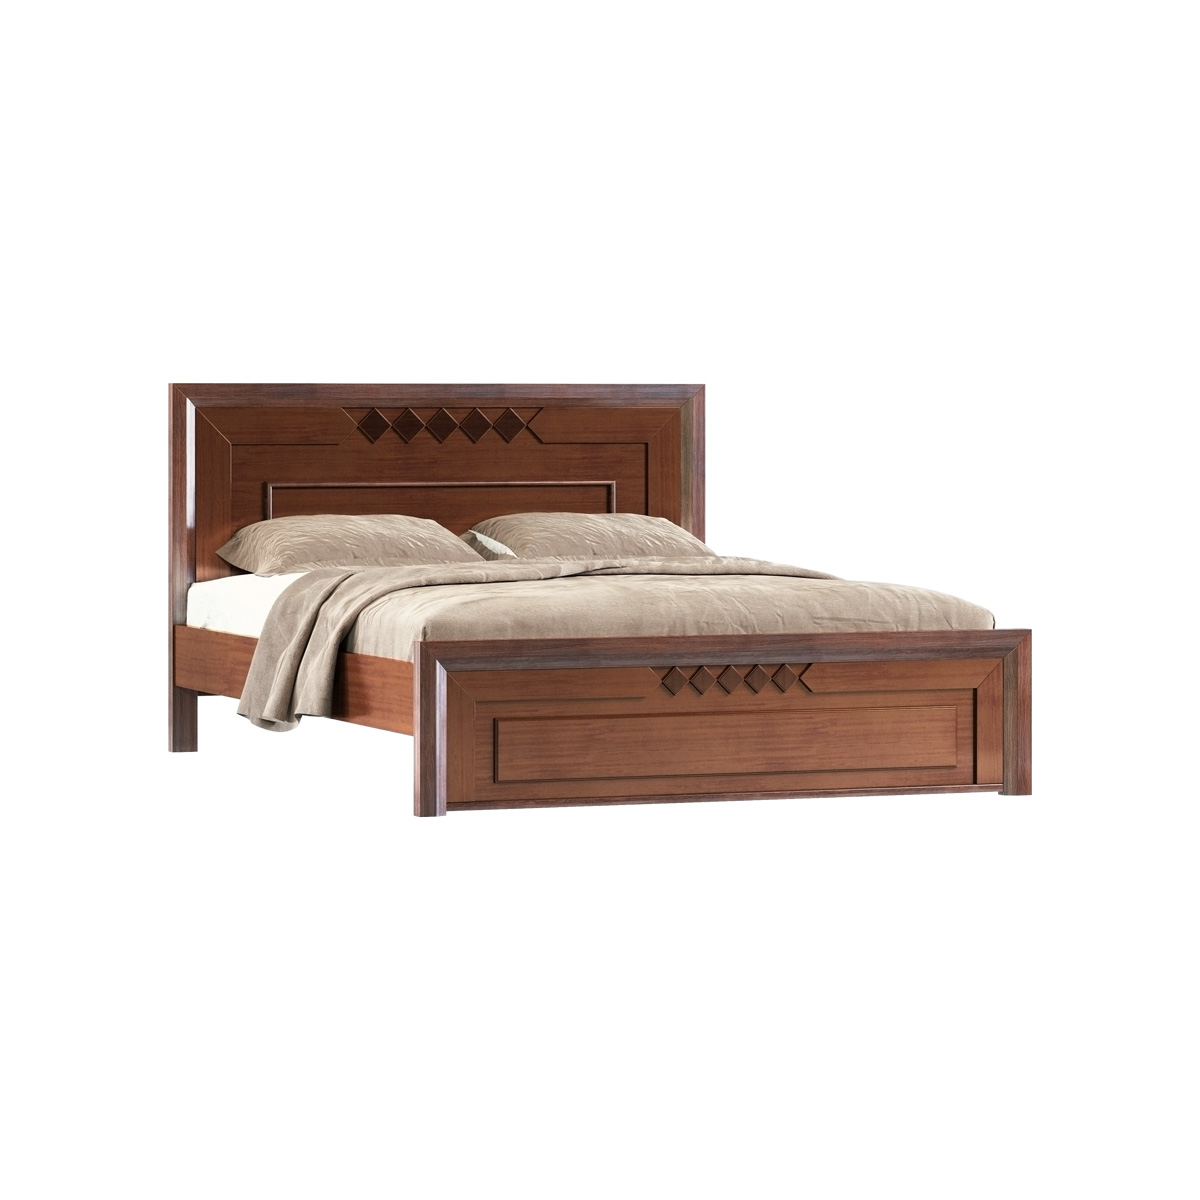 5 Star Wooden double bed I BDH-365-3-1-20